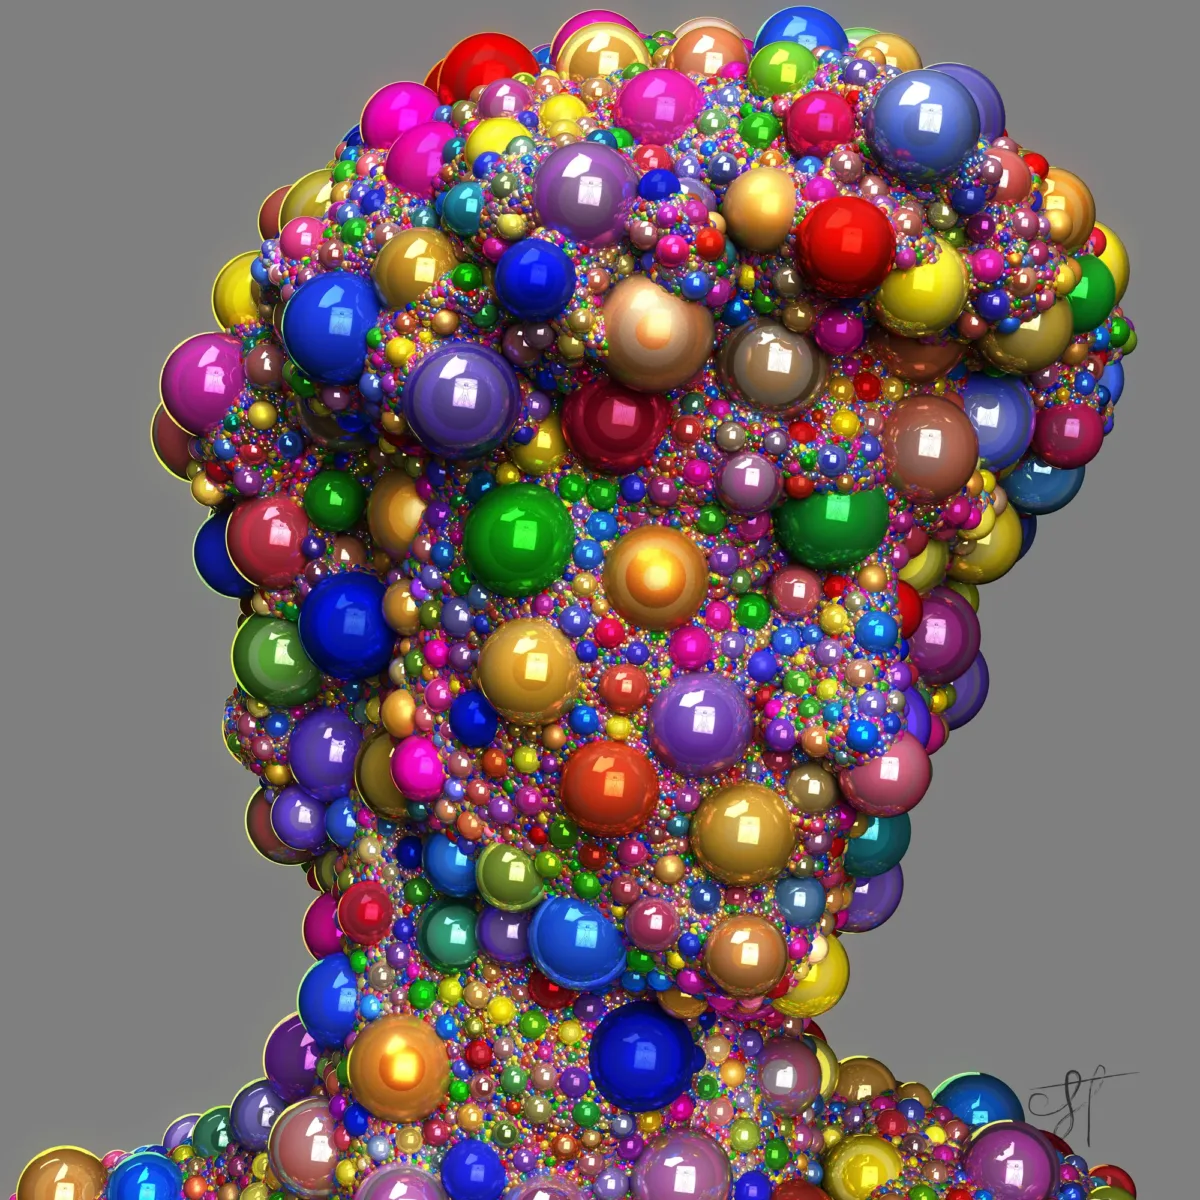 Print from contemporary artist Gabriel Halo - David#38 for sell. This version of the metamorphosis is made from bright colored balls. In reflections of balls you can see human model from Da Vinchi artist.